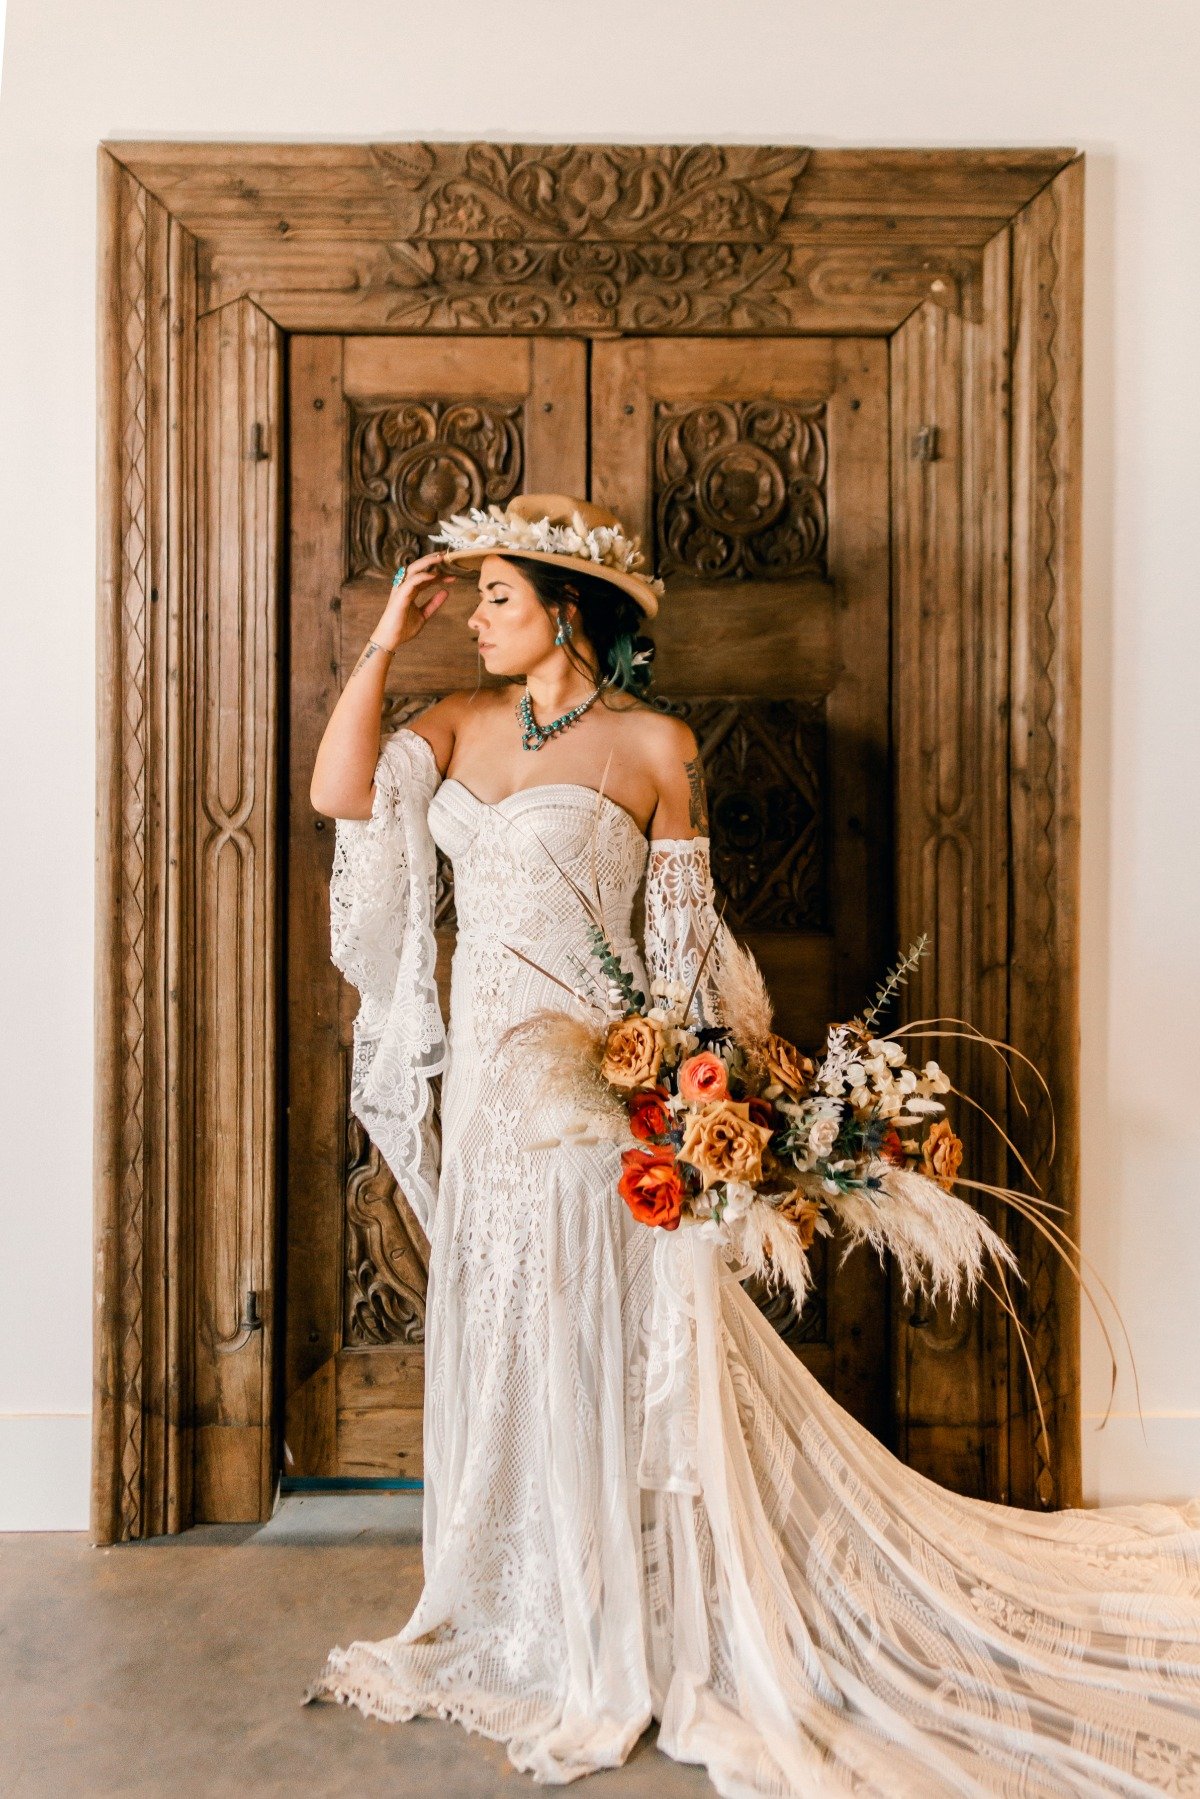 This Texas Team Went All In On The Southwestern Boho Theme For This Stunning Inspiration Shoot